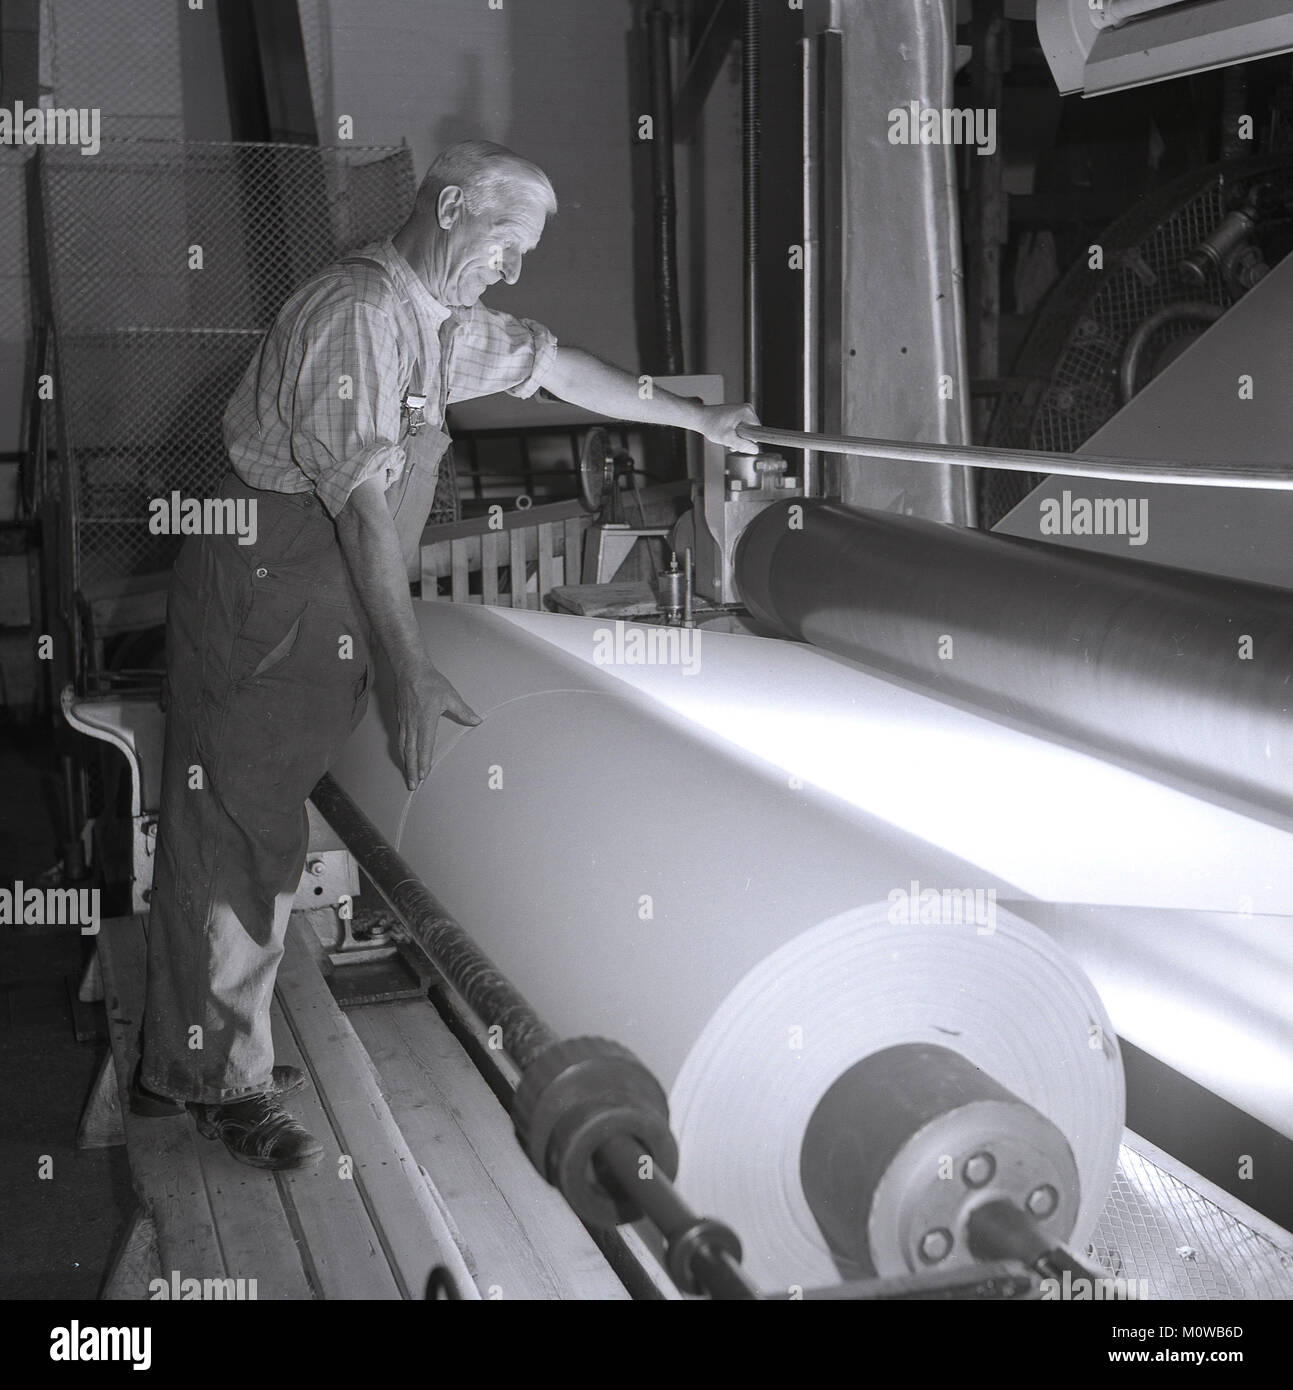 1950s, historical, male worker using a large paper making machine with giant rollers, on which the newly processed paper feeds onto, England, UK. Stock Photo